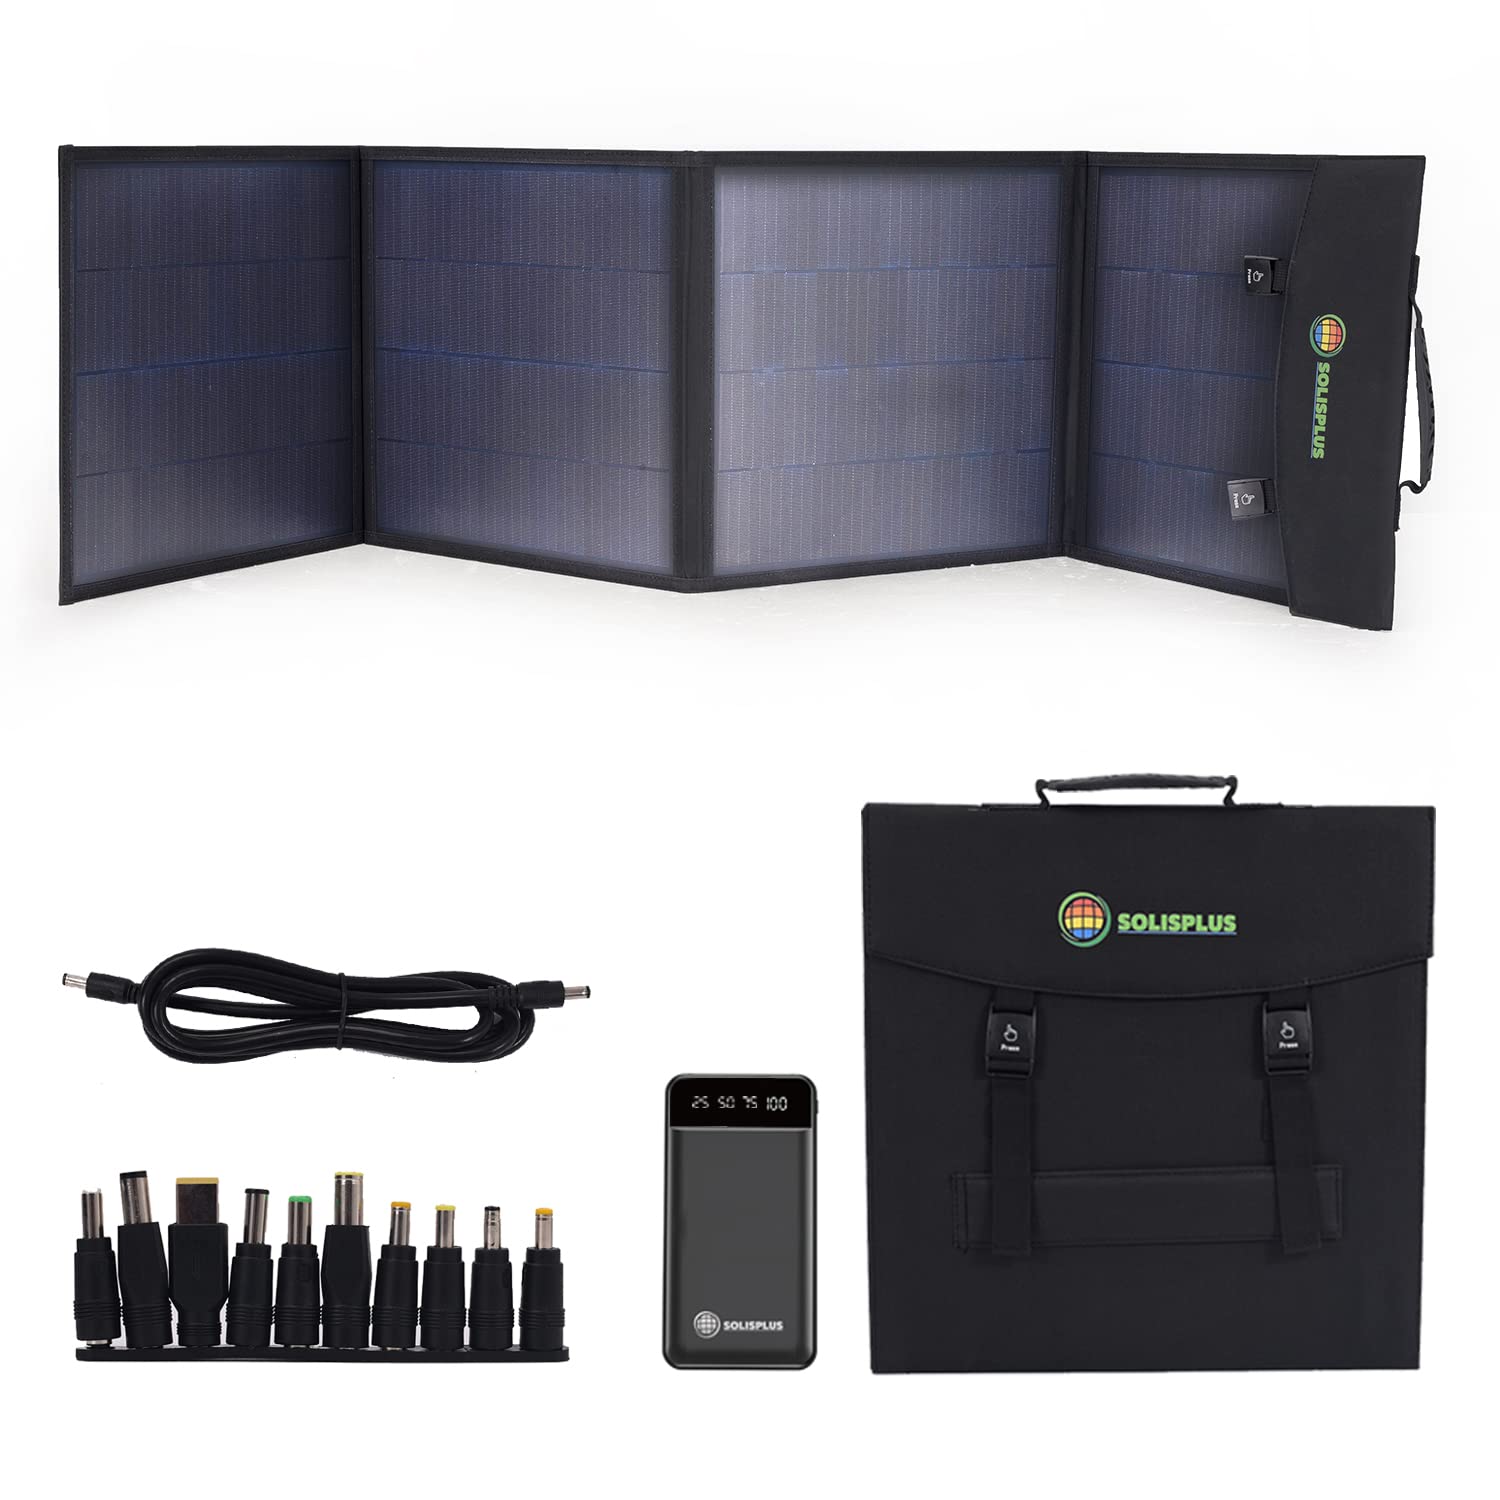 100 Watt Portable Solar Panel for Camping with Power Bank - Foldable ETFE Lightweight Solar Panel with 1 USB QC 3.0 5V/3A , 1 USB 5V/3A, DC5525 plus 10 DC connectors - Includes 10000mAh Power Bank  - Like New